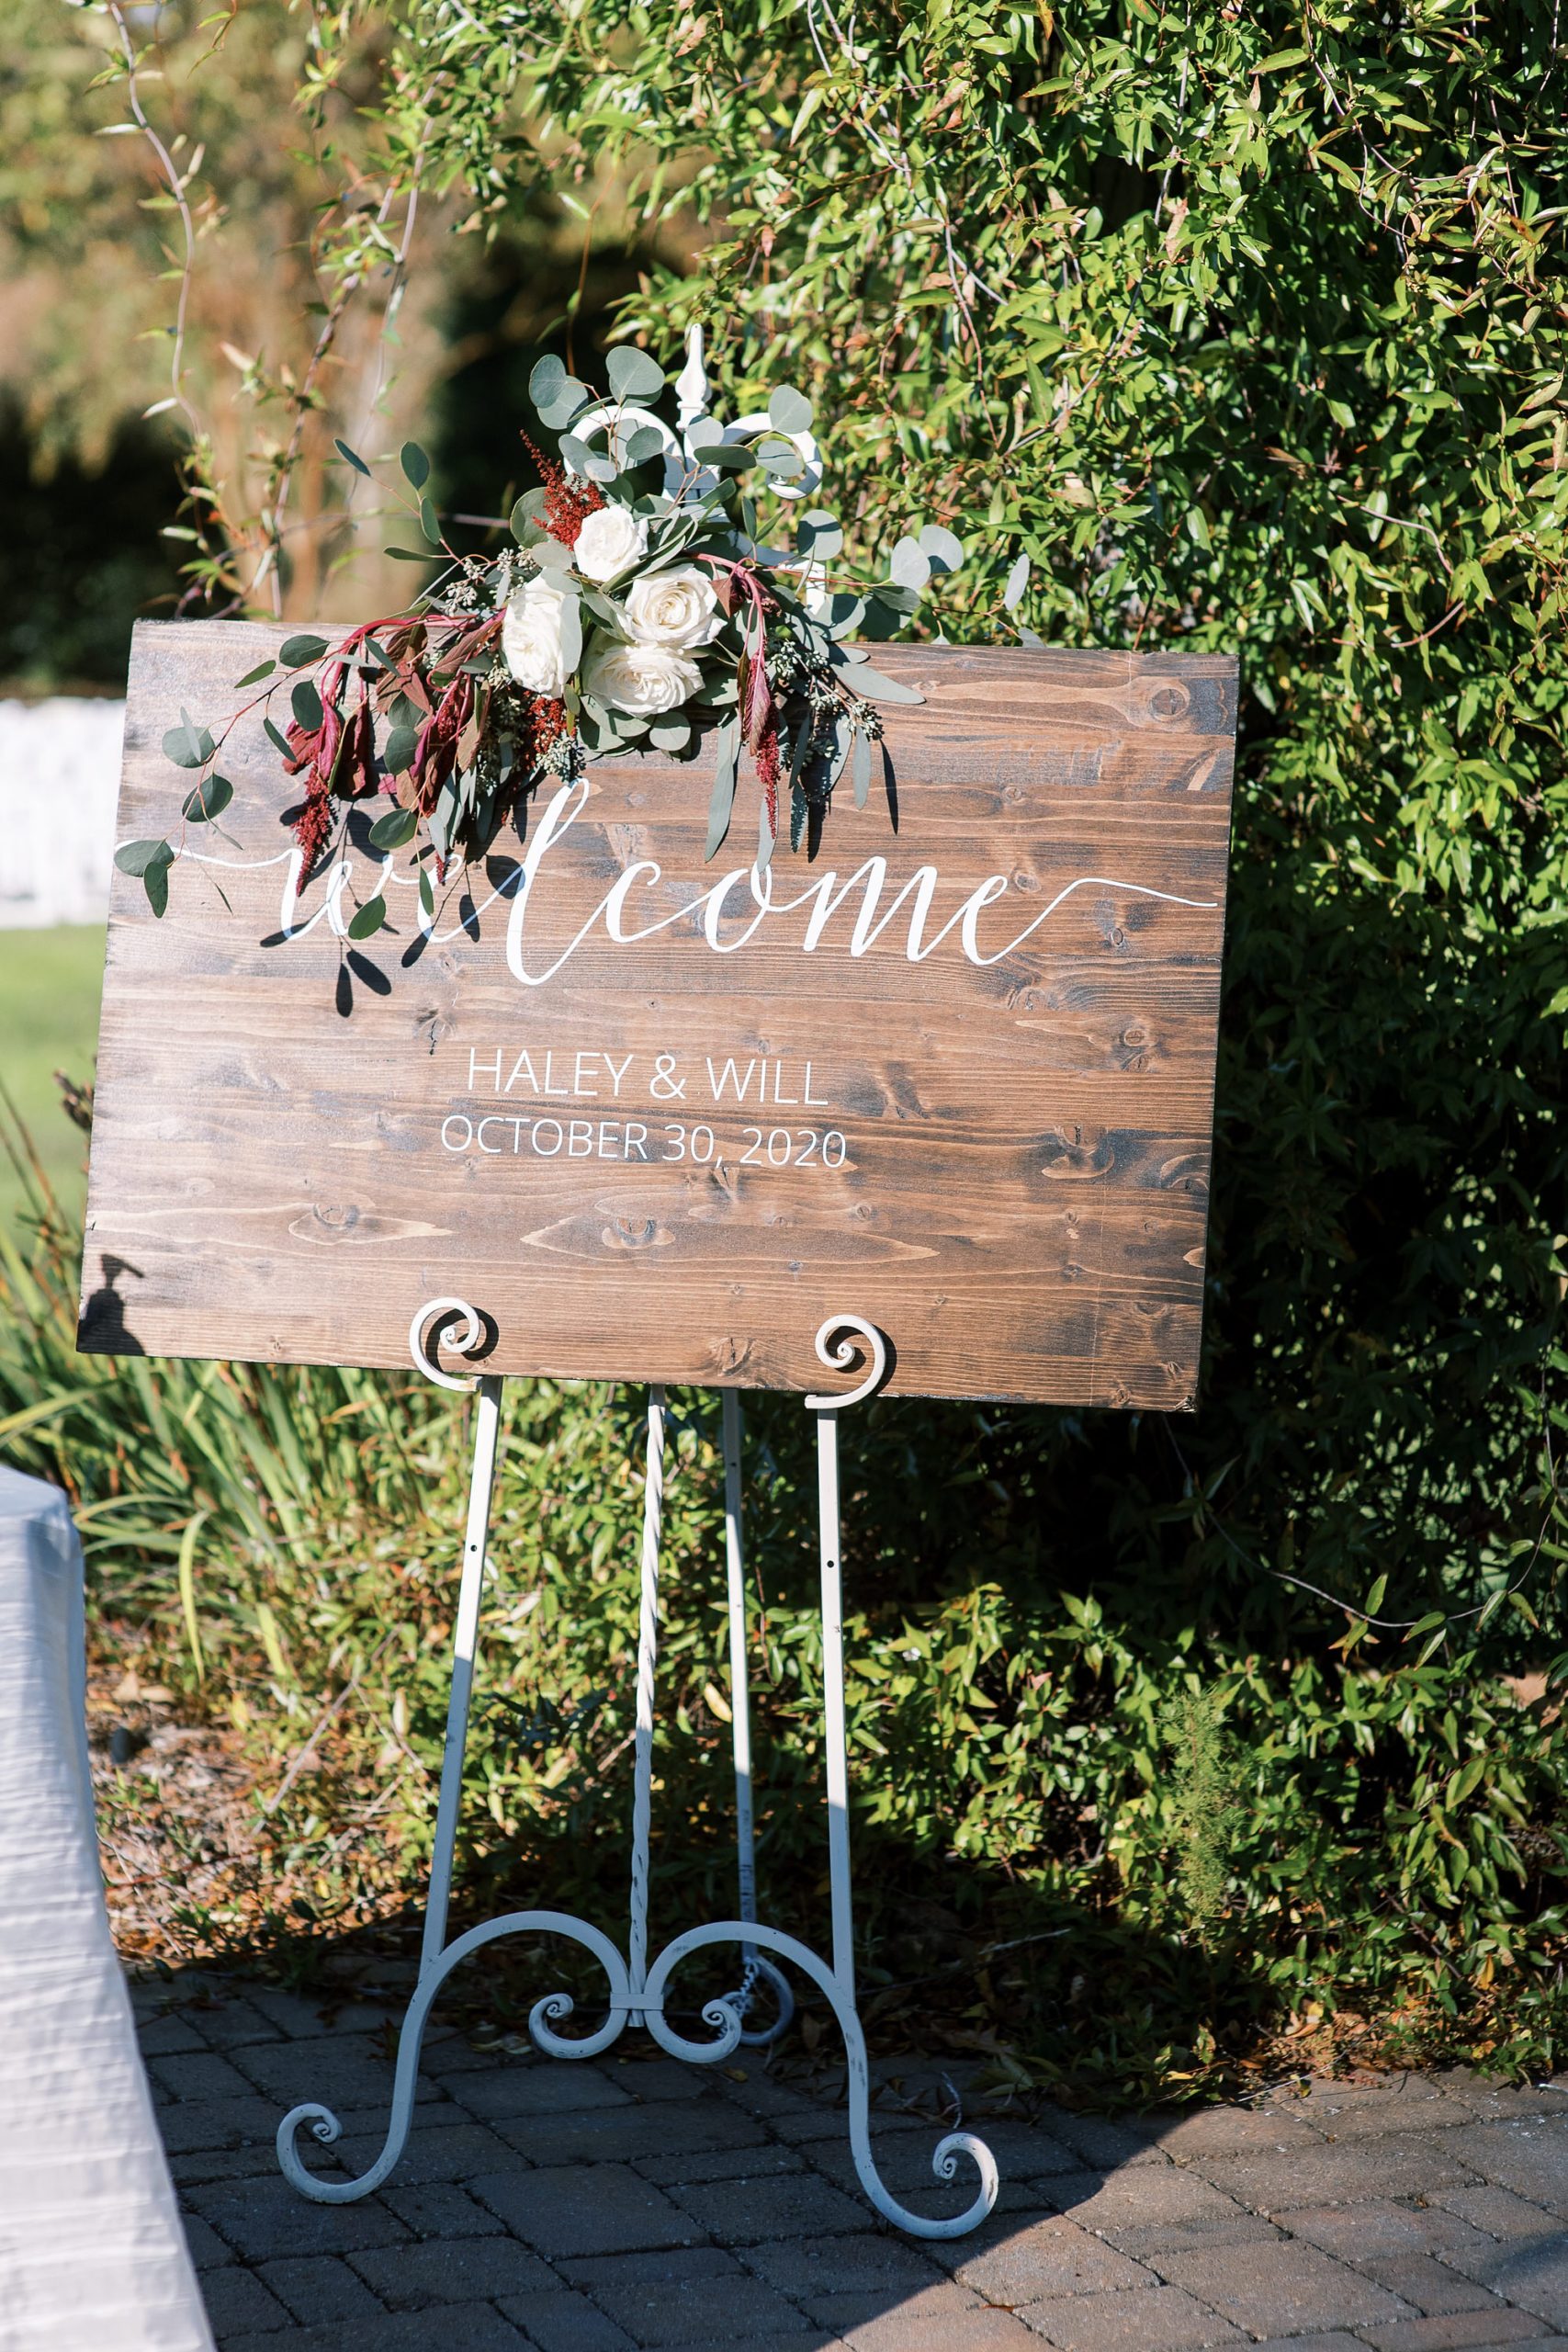 rustic wooden welcome sign for the Arbors Events wedding ceremony